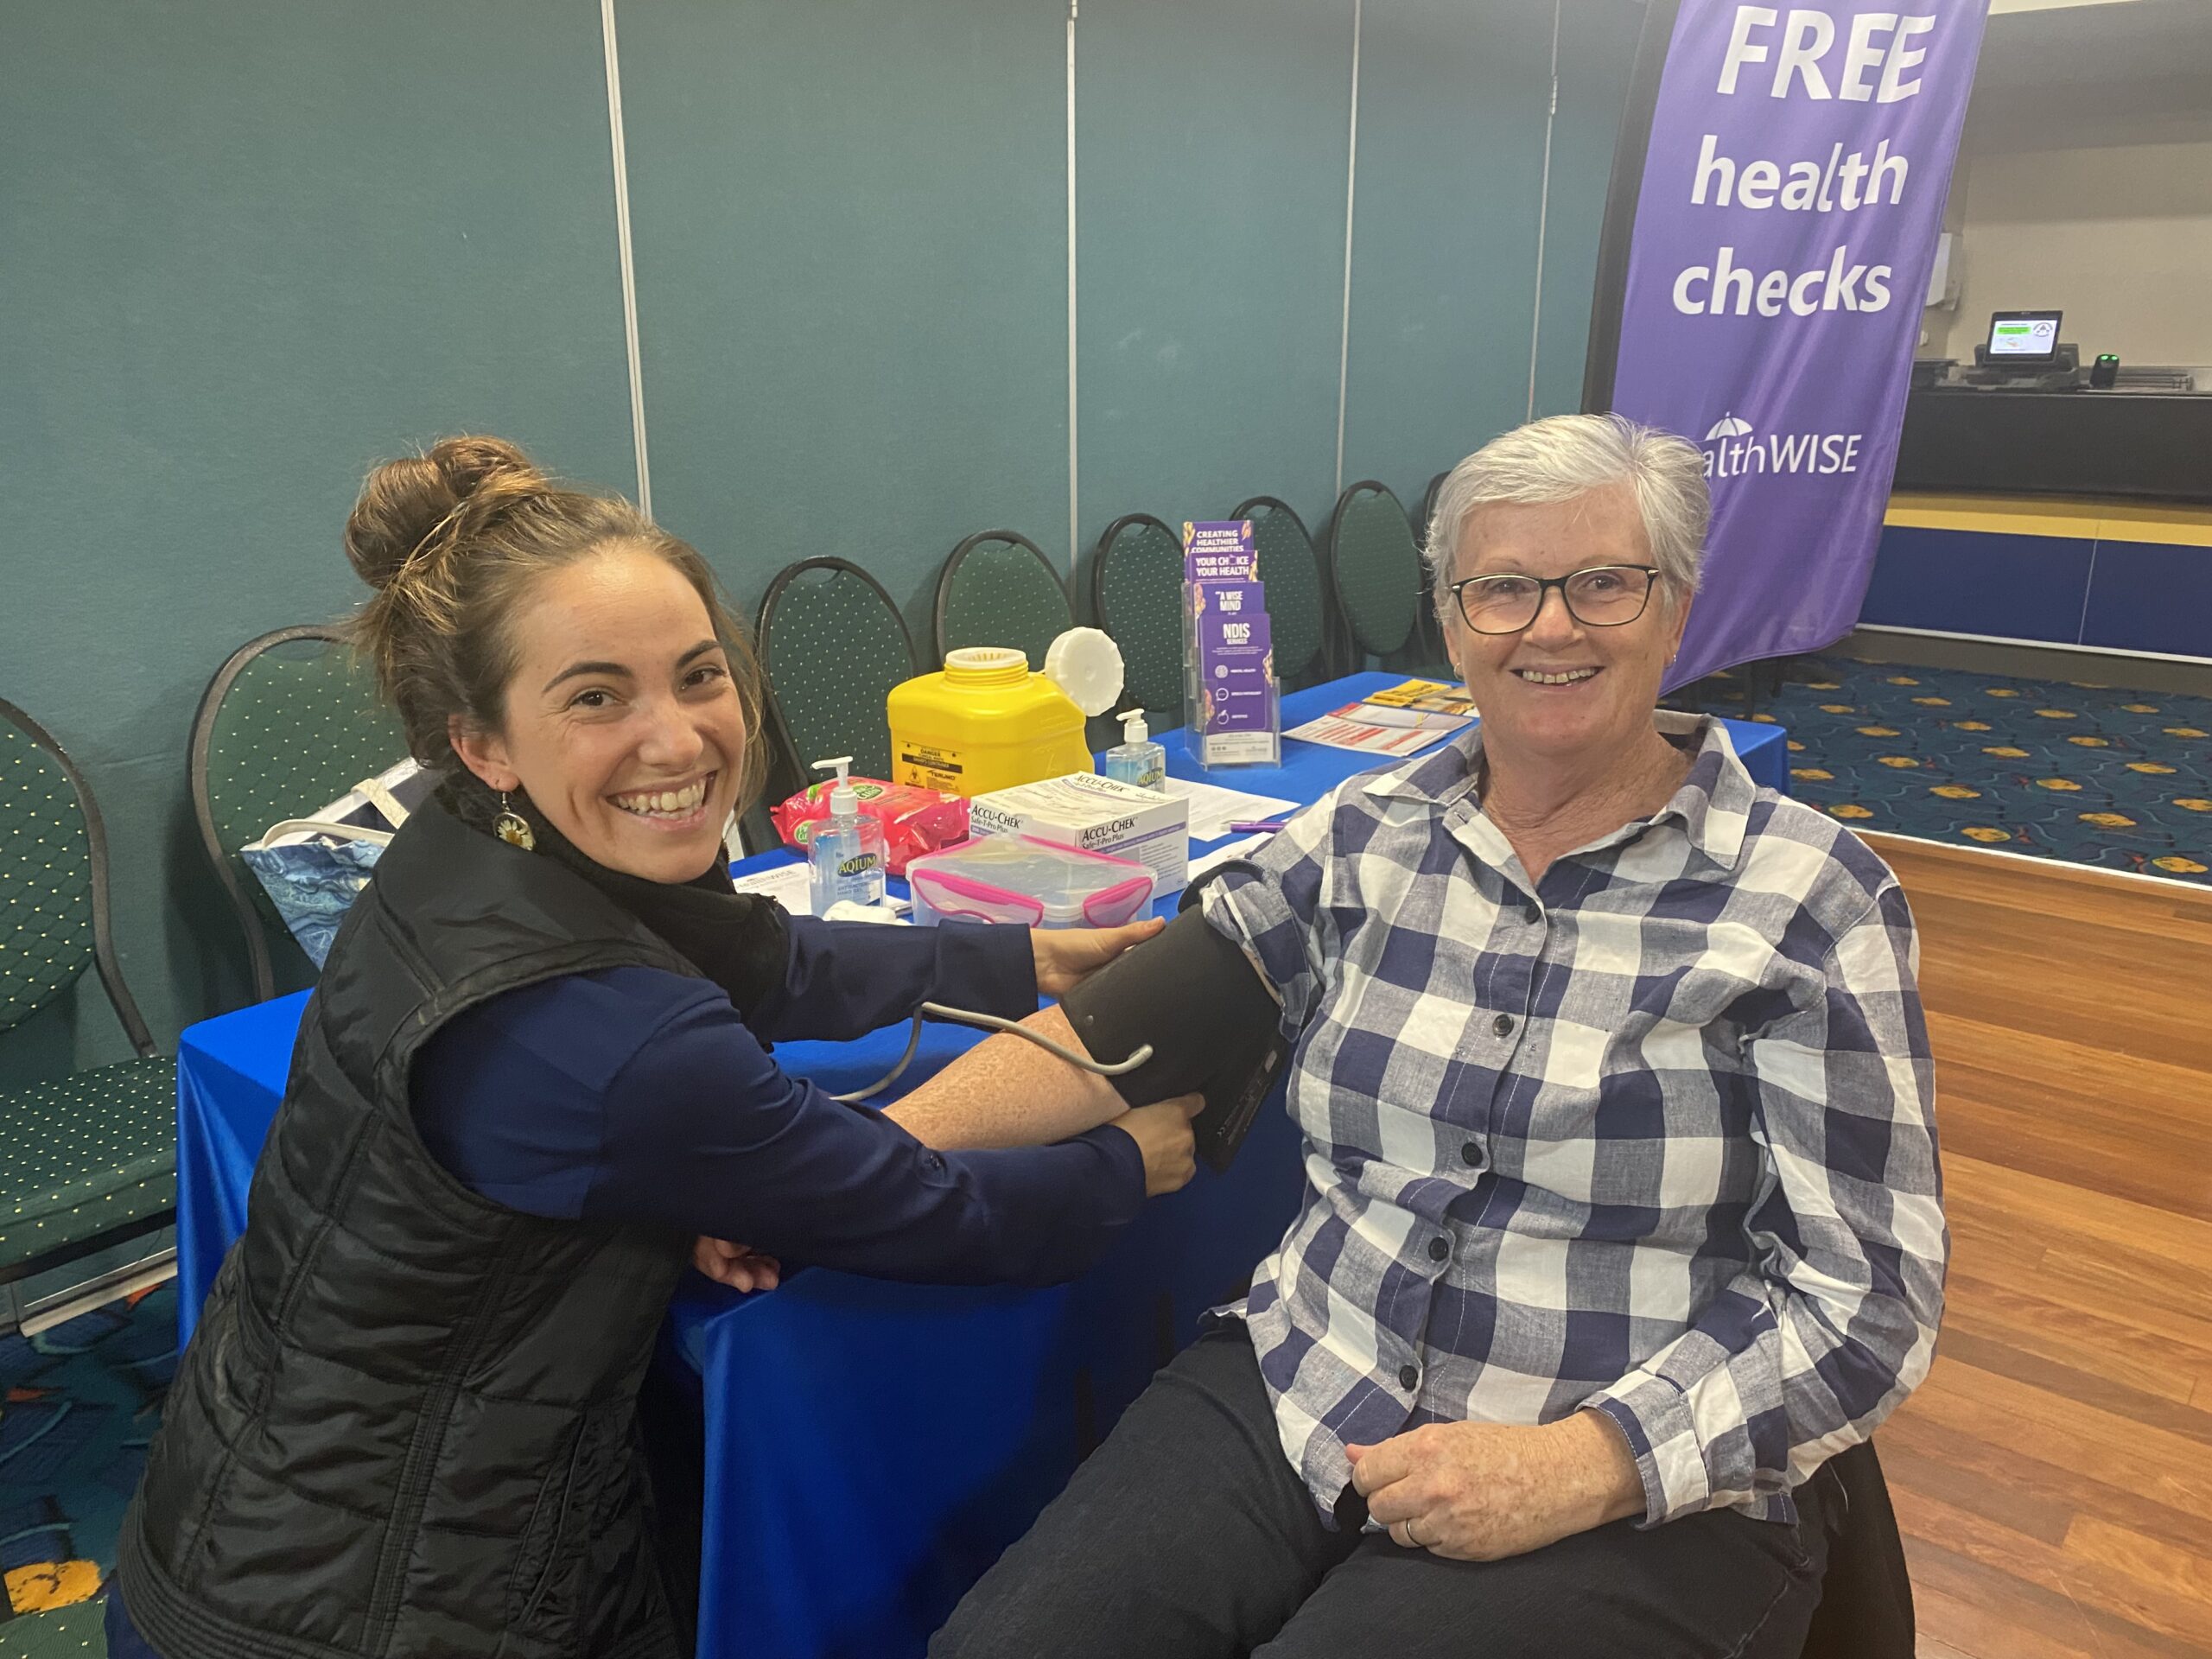 Carla Twigg from Healthwise was offering free health checks, pictured with Jenny Melton.